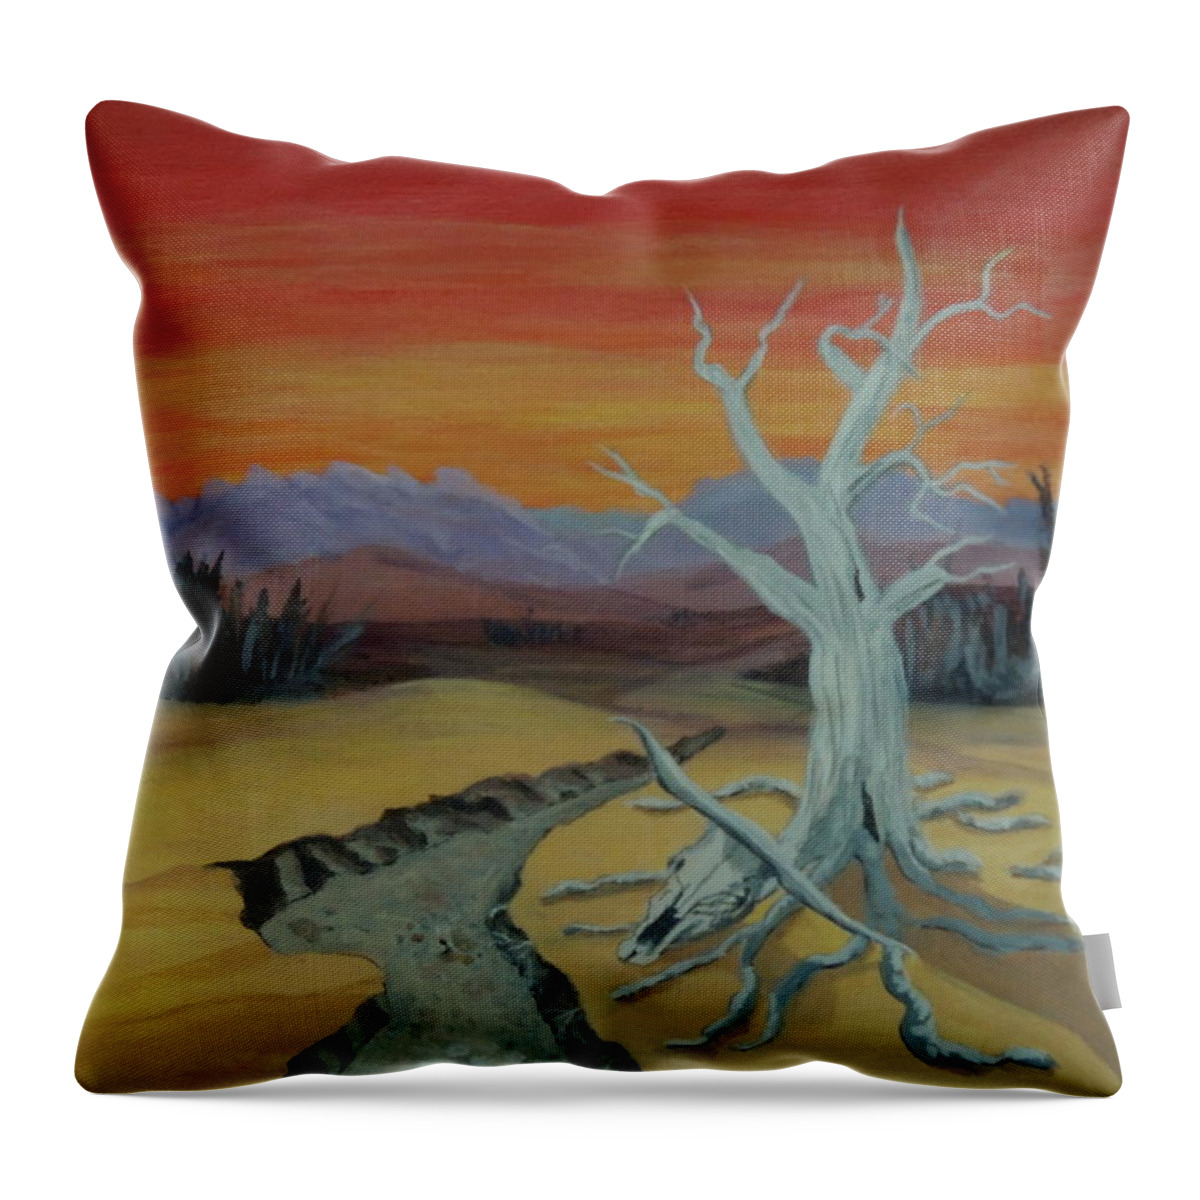 Landscape Throw Pillow featuring the painting The Desert by Lisa MacDonald